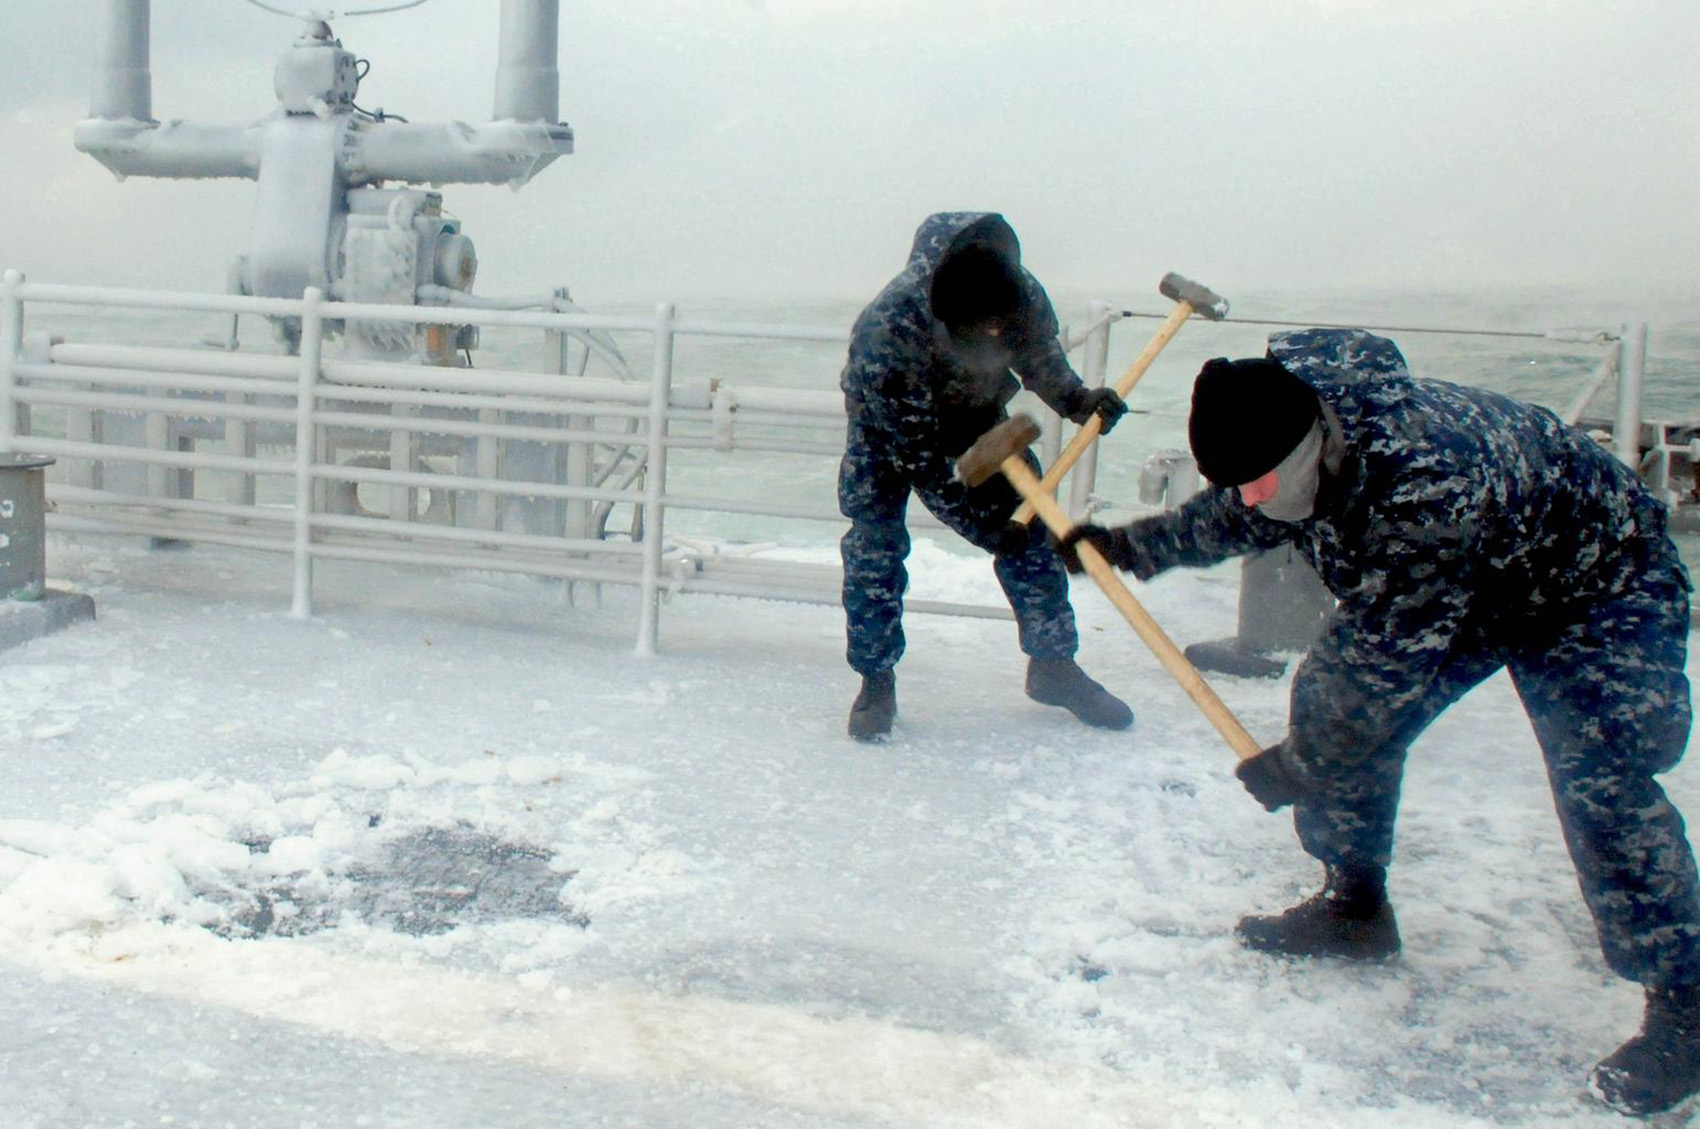 what are sledgehammers used for - Navy using sledge hammers to break up ice on a ship